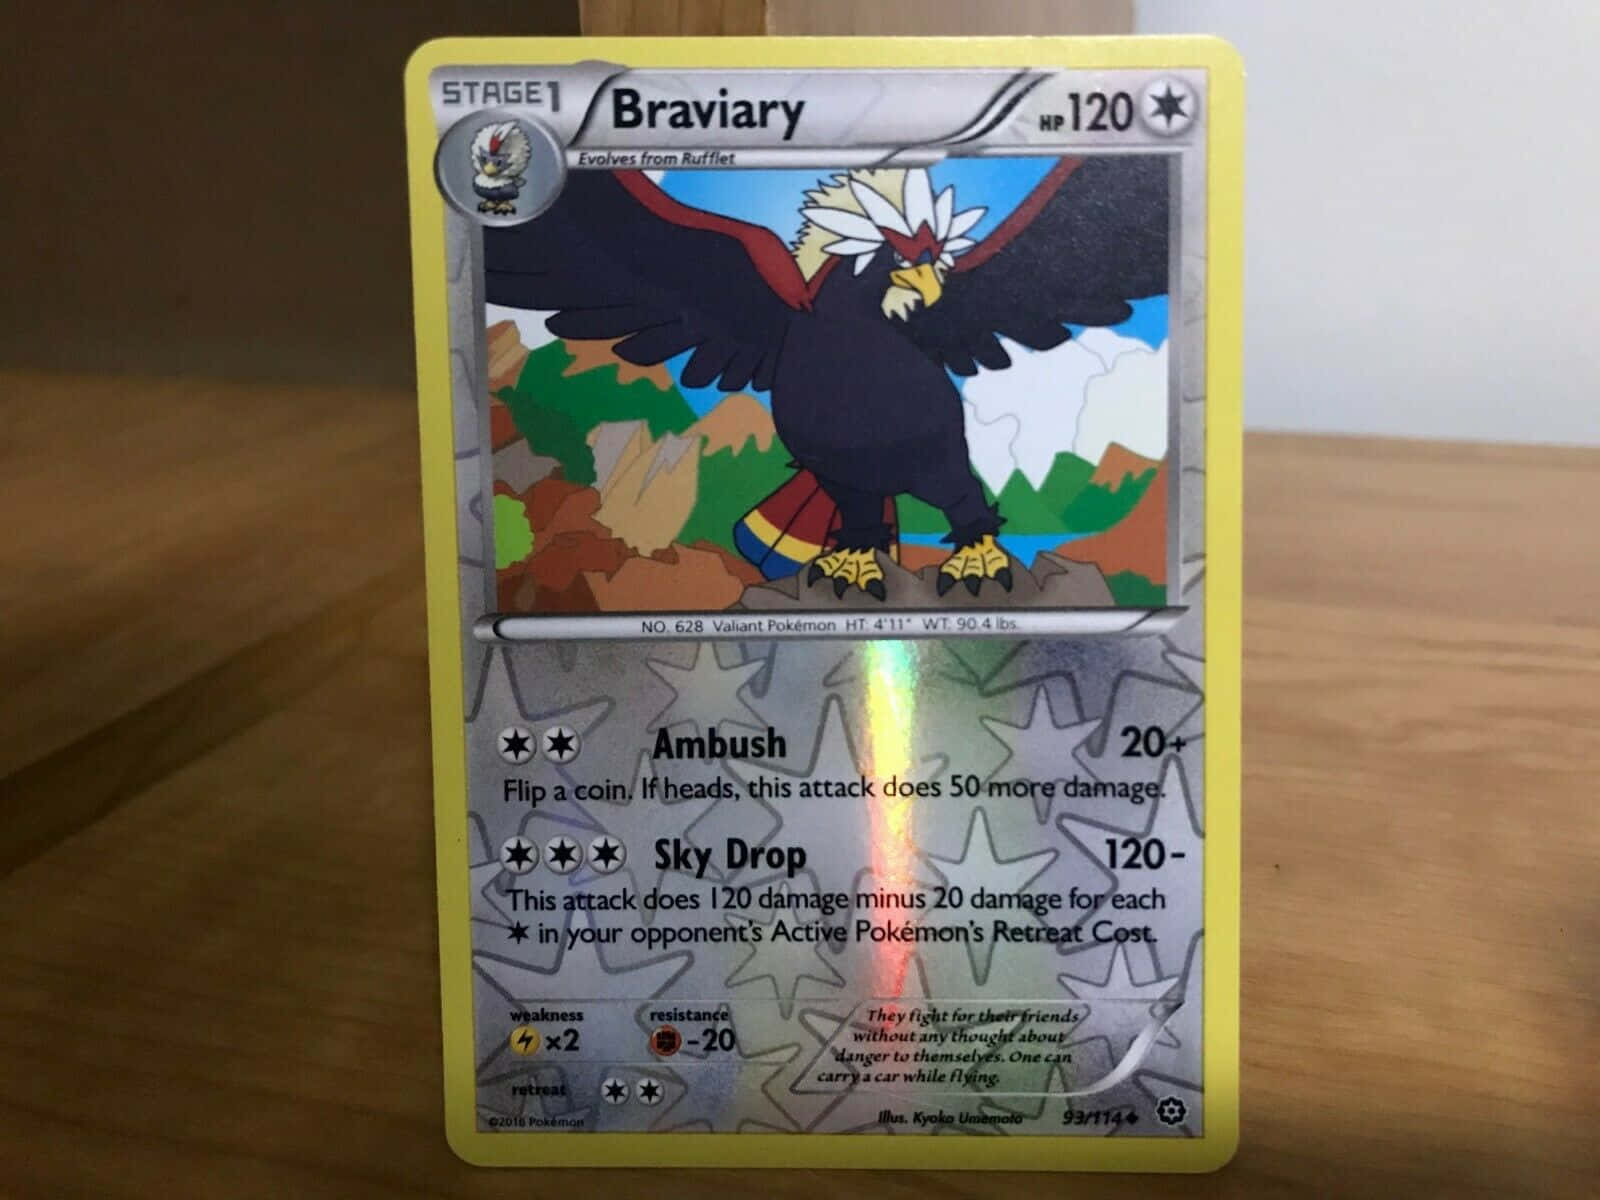 Braviary Pokémon Card With Attack Moves Wallpaper